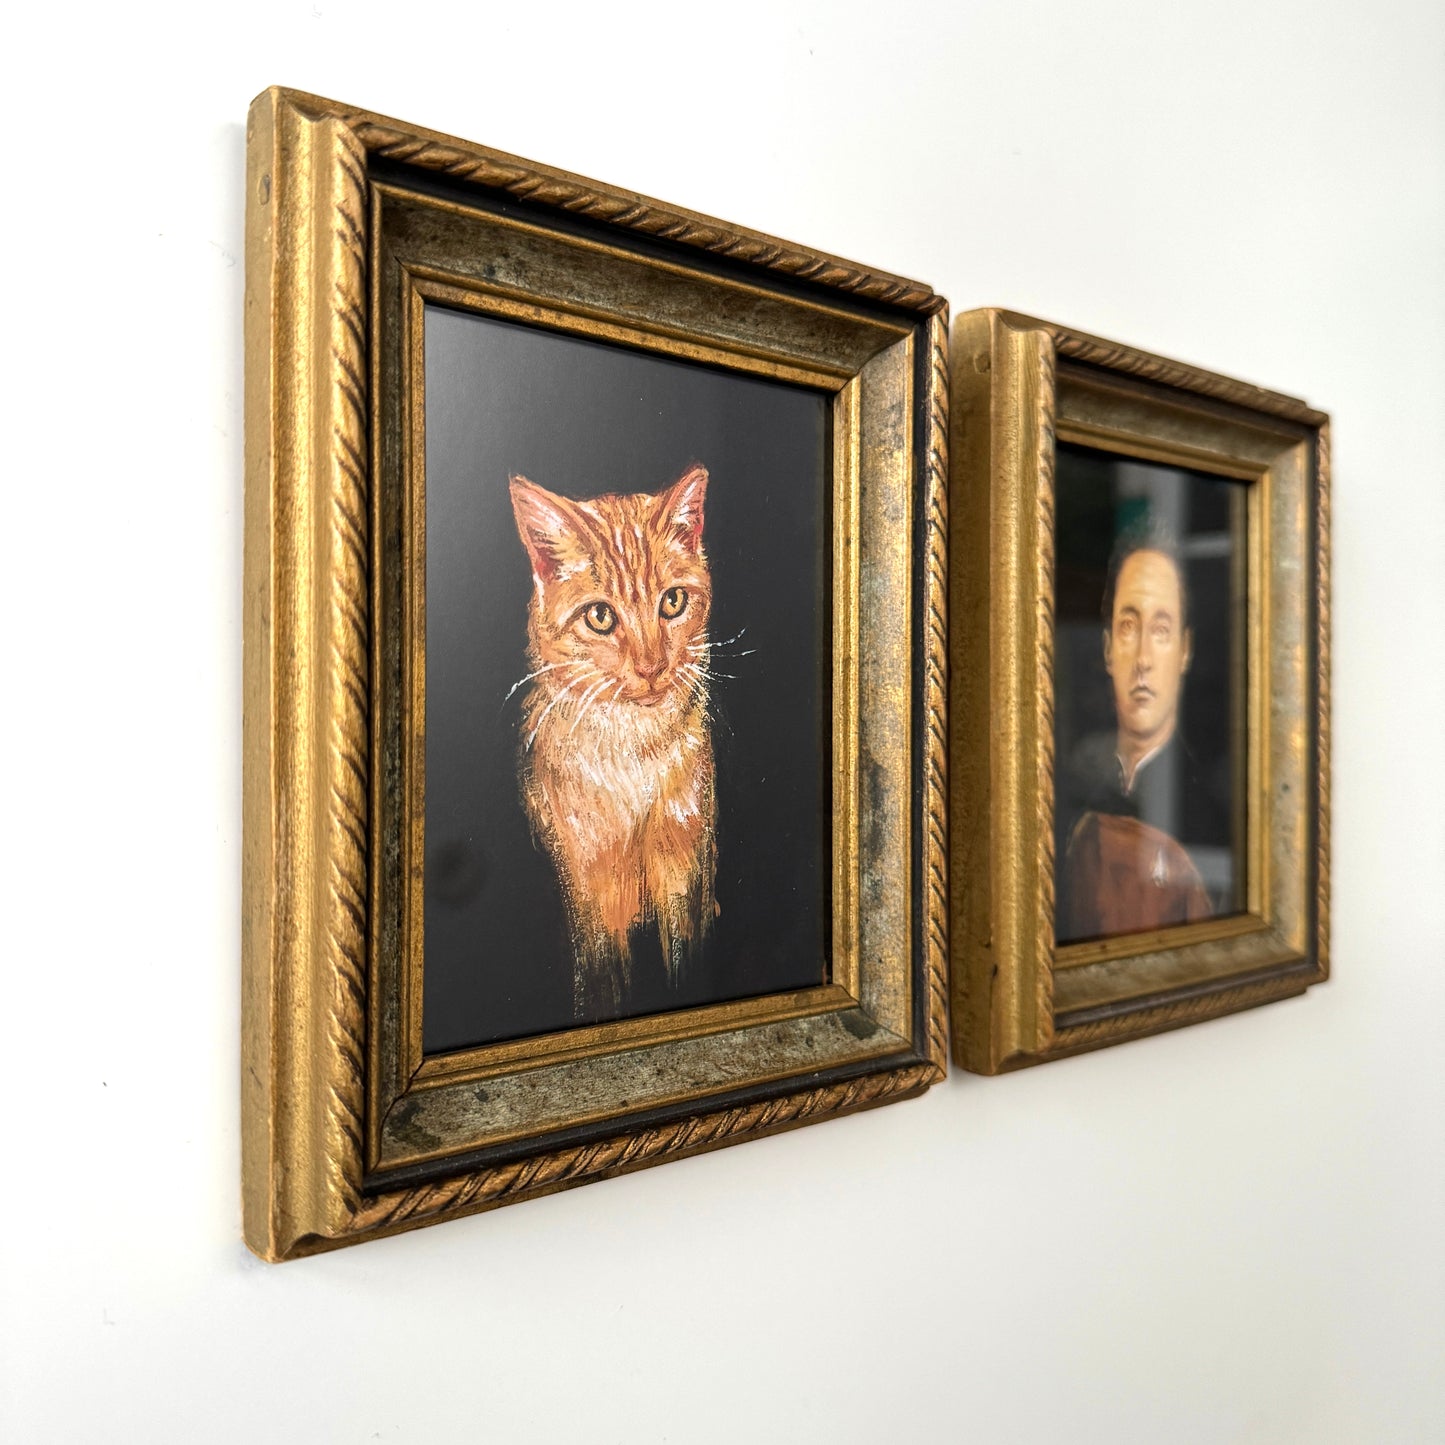 My Cat and I - 2x PRINT in reclaimed gold wood frames